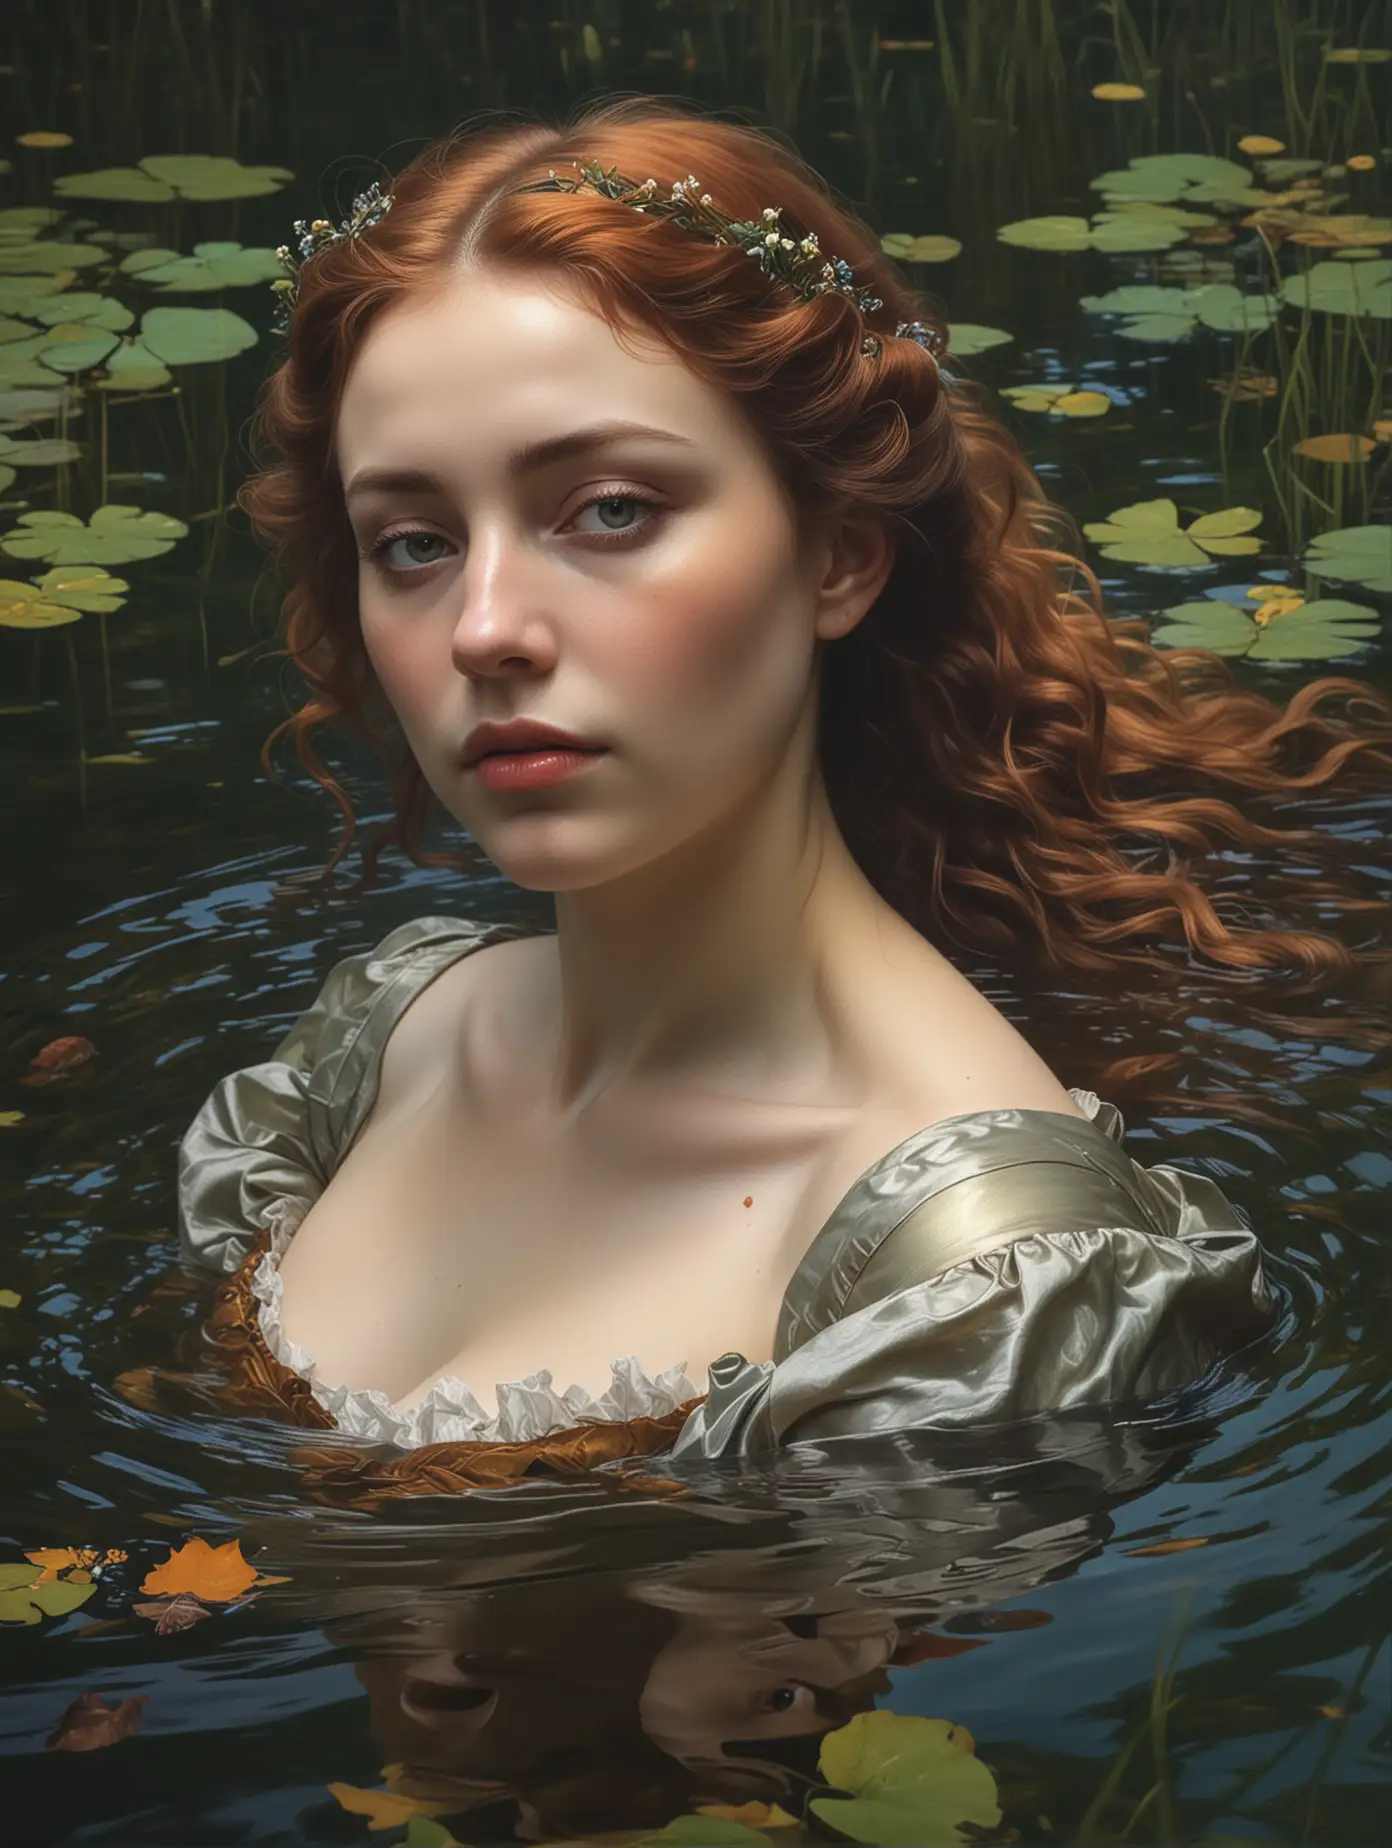 Ophelia's dream, close up of lady in the lake, Low saturation colour photography, Warm Lighting Style, vintage, top light, masterful painting in the style of John Everett Millais, | Marco Mazzoni | Yuri Ivanovich, Todd McFarlane, Aleksi Briclot, oil on canvas, highly detailed